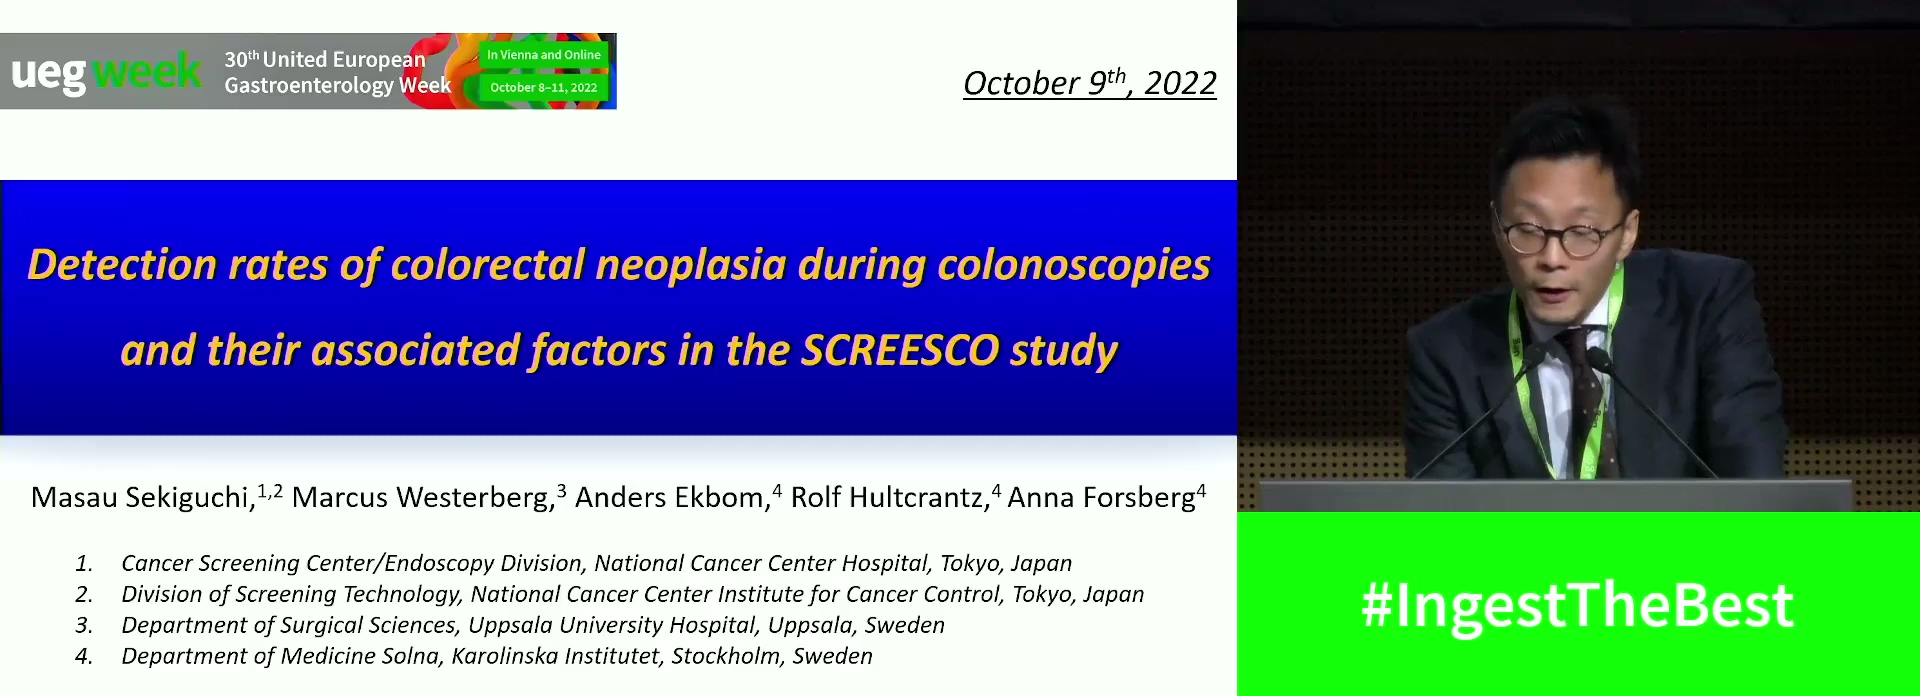 DETECTION RATES OF COLORECTAL NEOPLASIA DURING COLONOSCOPIES AND THEIR ASSOCIATED FACTORS IN THE SCREESCO STUDY